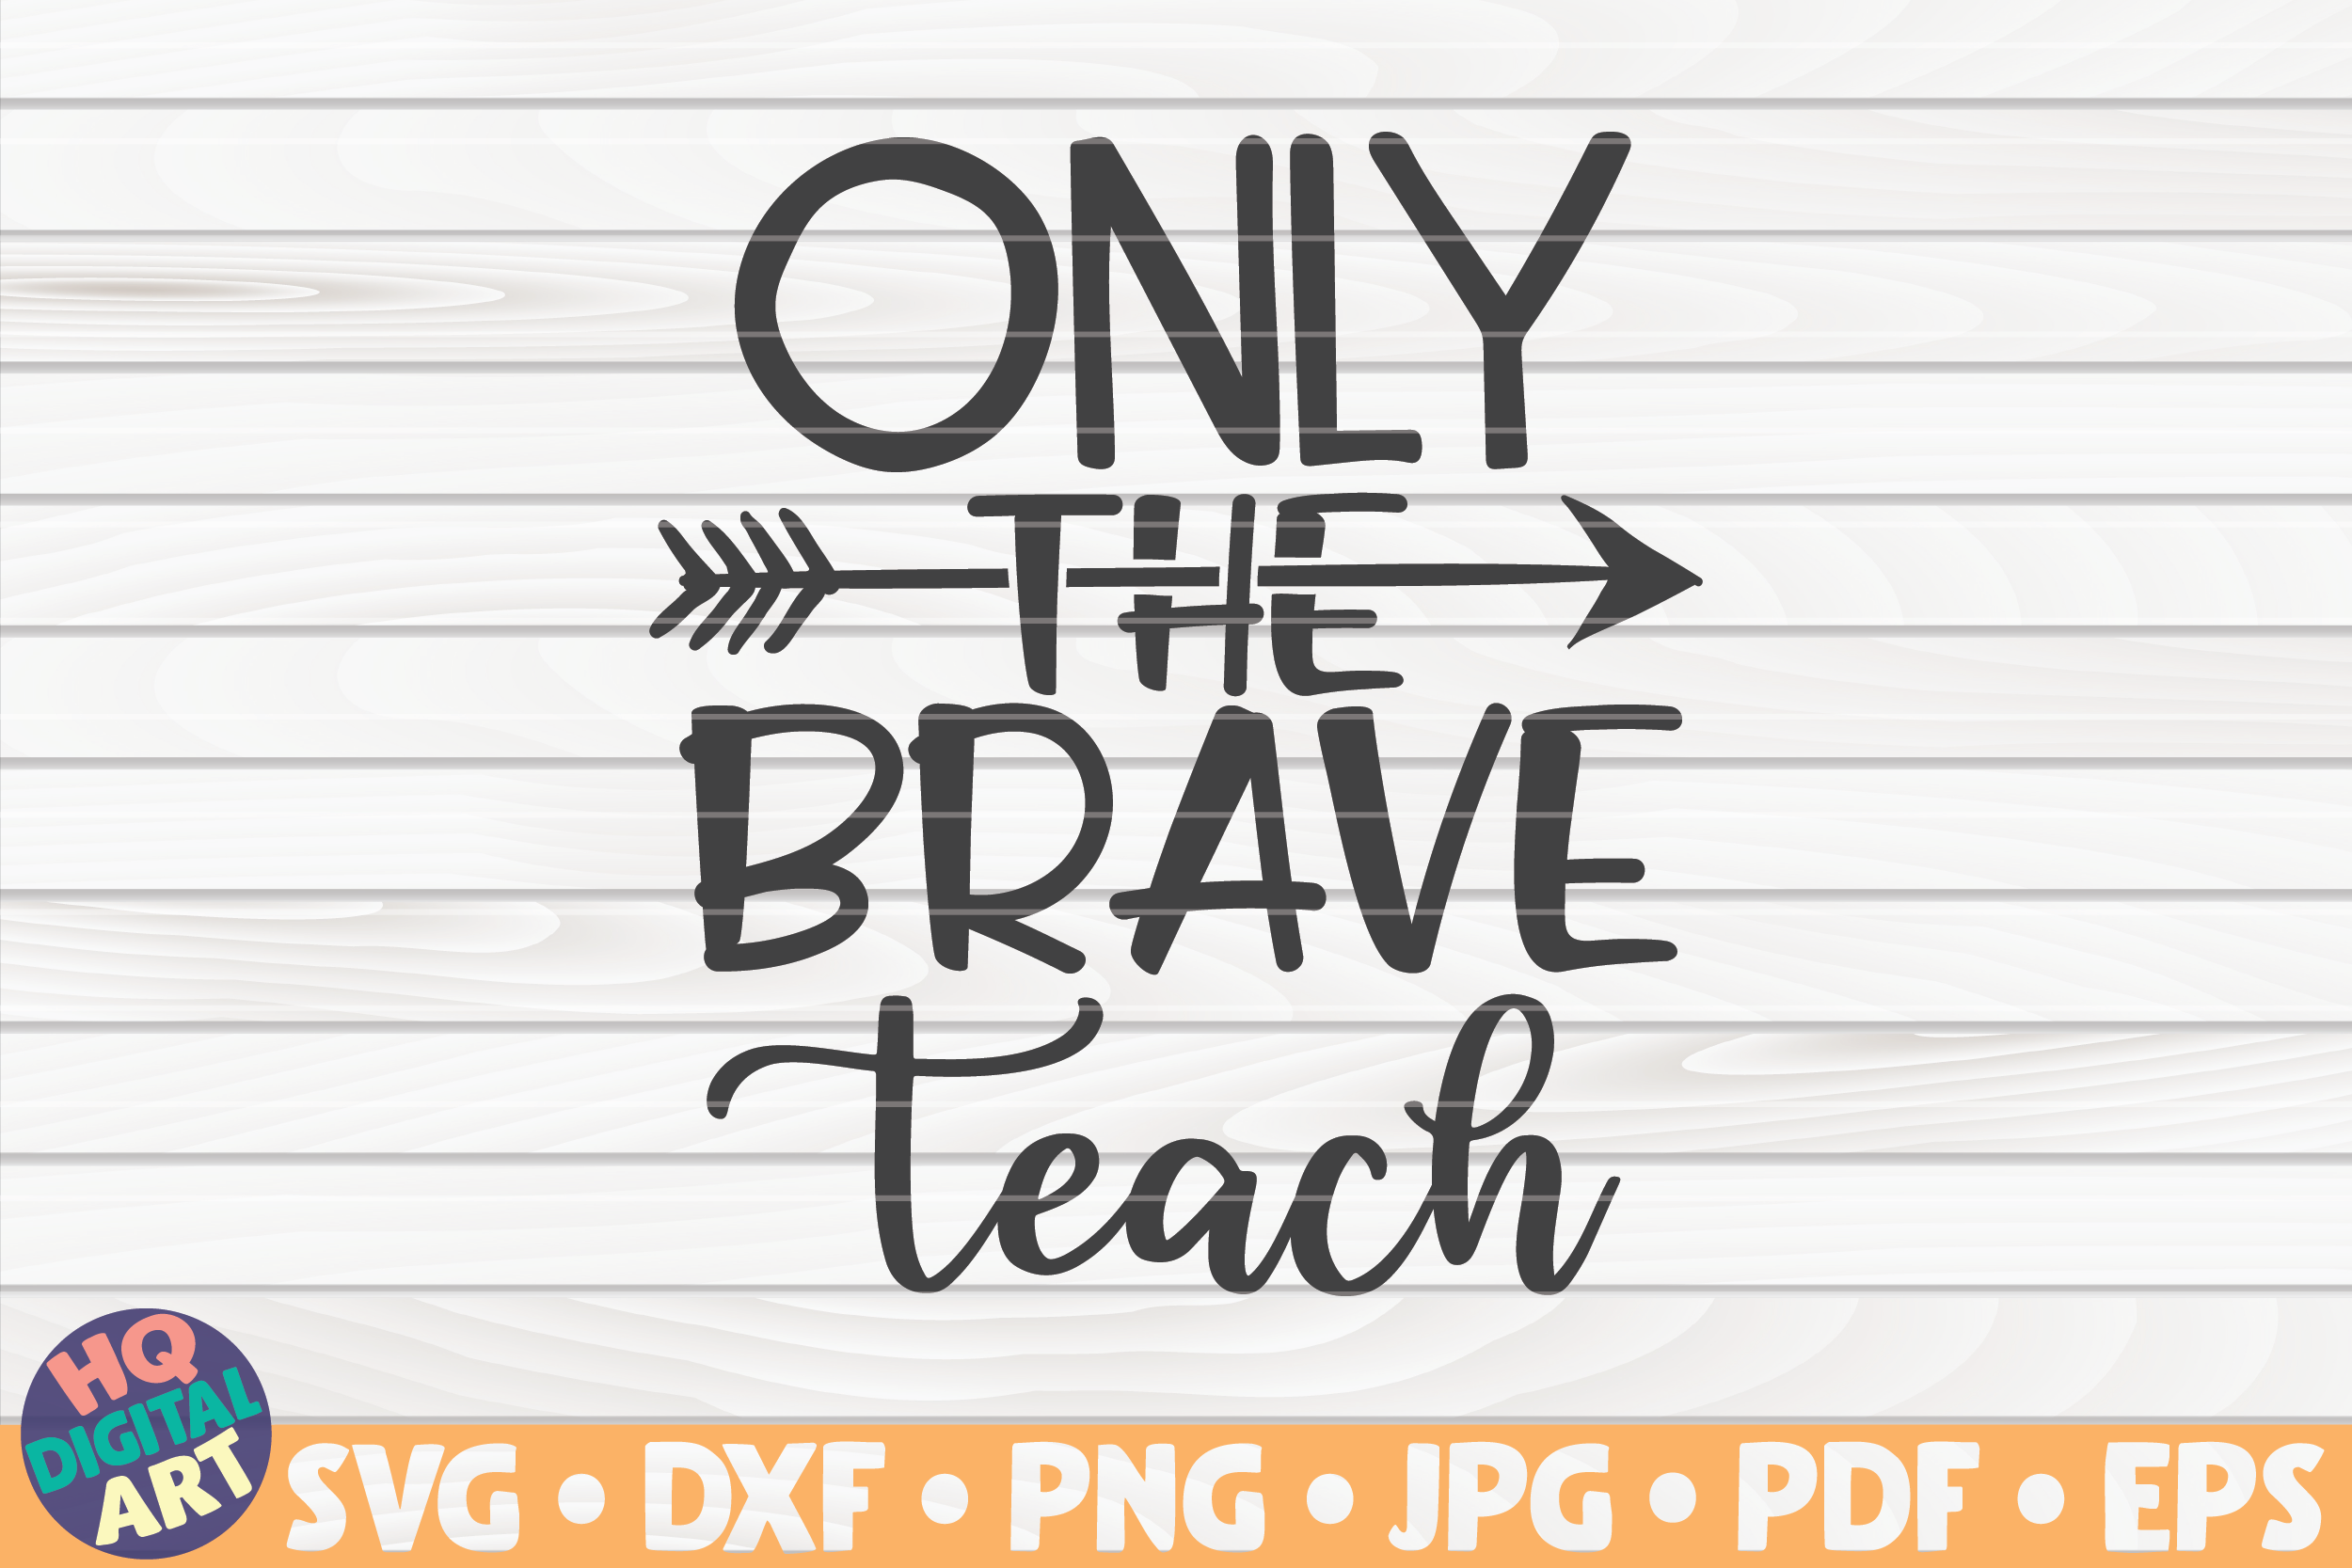 Only The Brave Teach Svg Teacher Quote By Hqdigitalart Thehungryjpeg Com